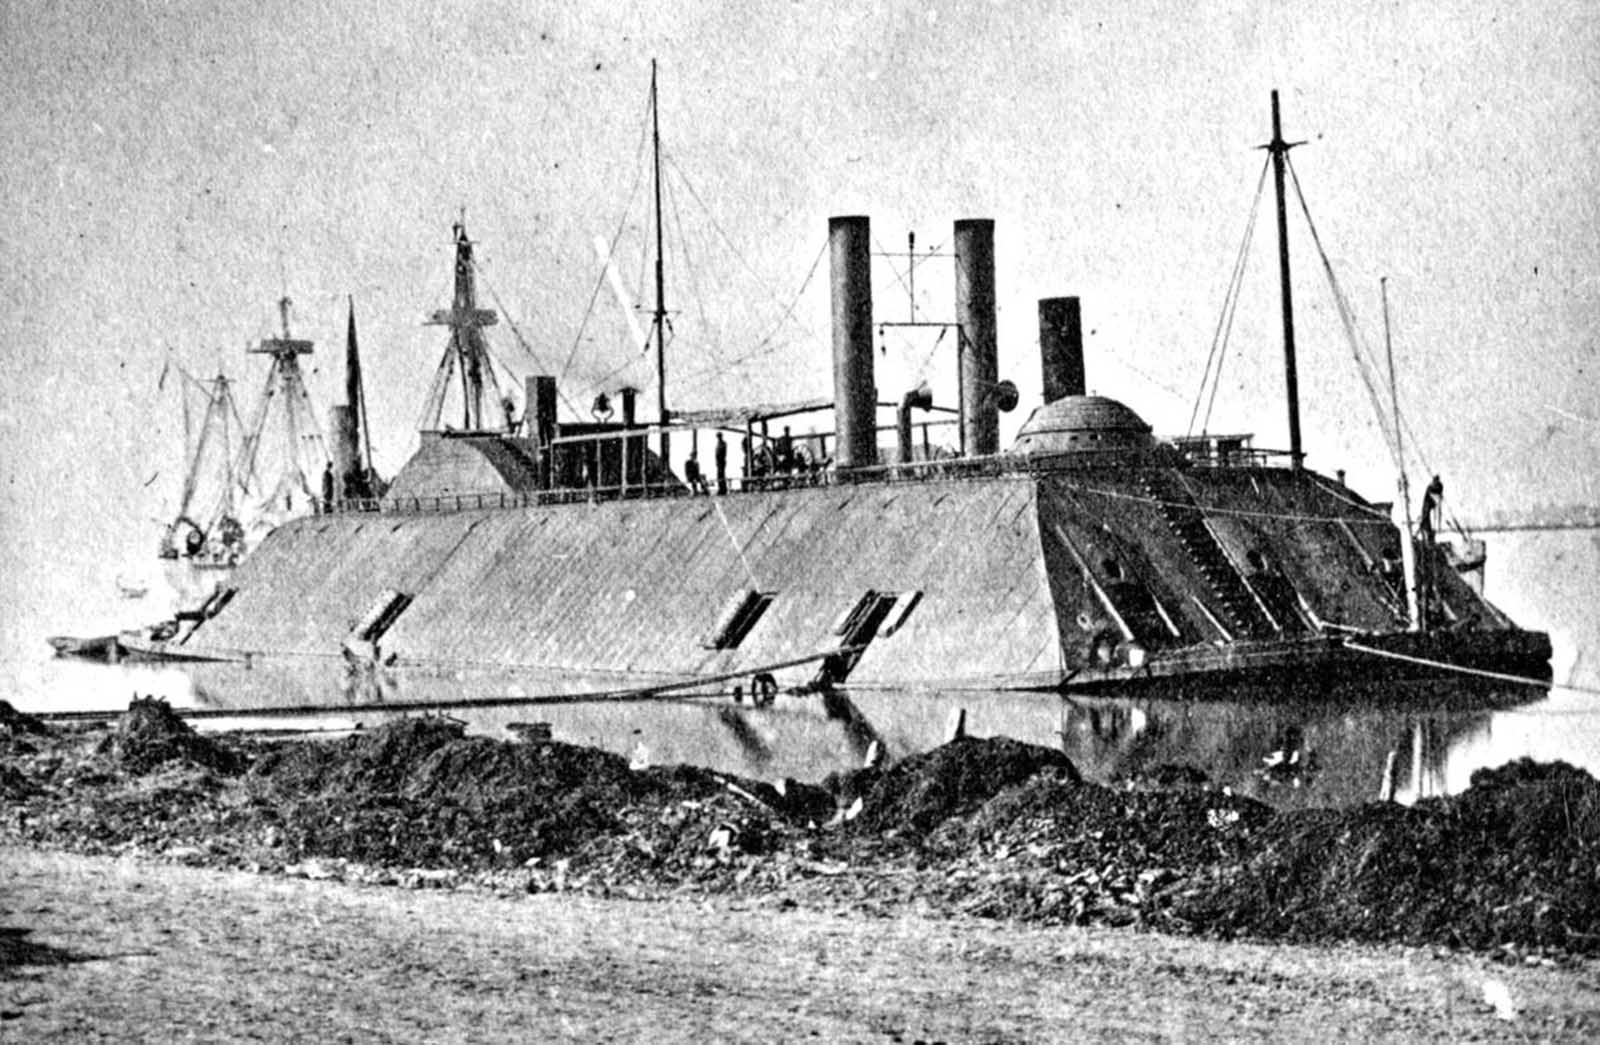 A March, 1863 photo of the USS Essex. The 1000-ton ironclad river gunboat, originally a steam-powered ferry, was acquired during the American Civil War by the US Army in 1861 for the Western Gunboat Flotilla. She was transferred to the US Navy in 1862 and participated in several operations on the Mississippi River, including the capture of Baton Rouge and Port Hudson in 1863.